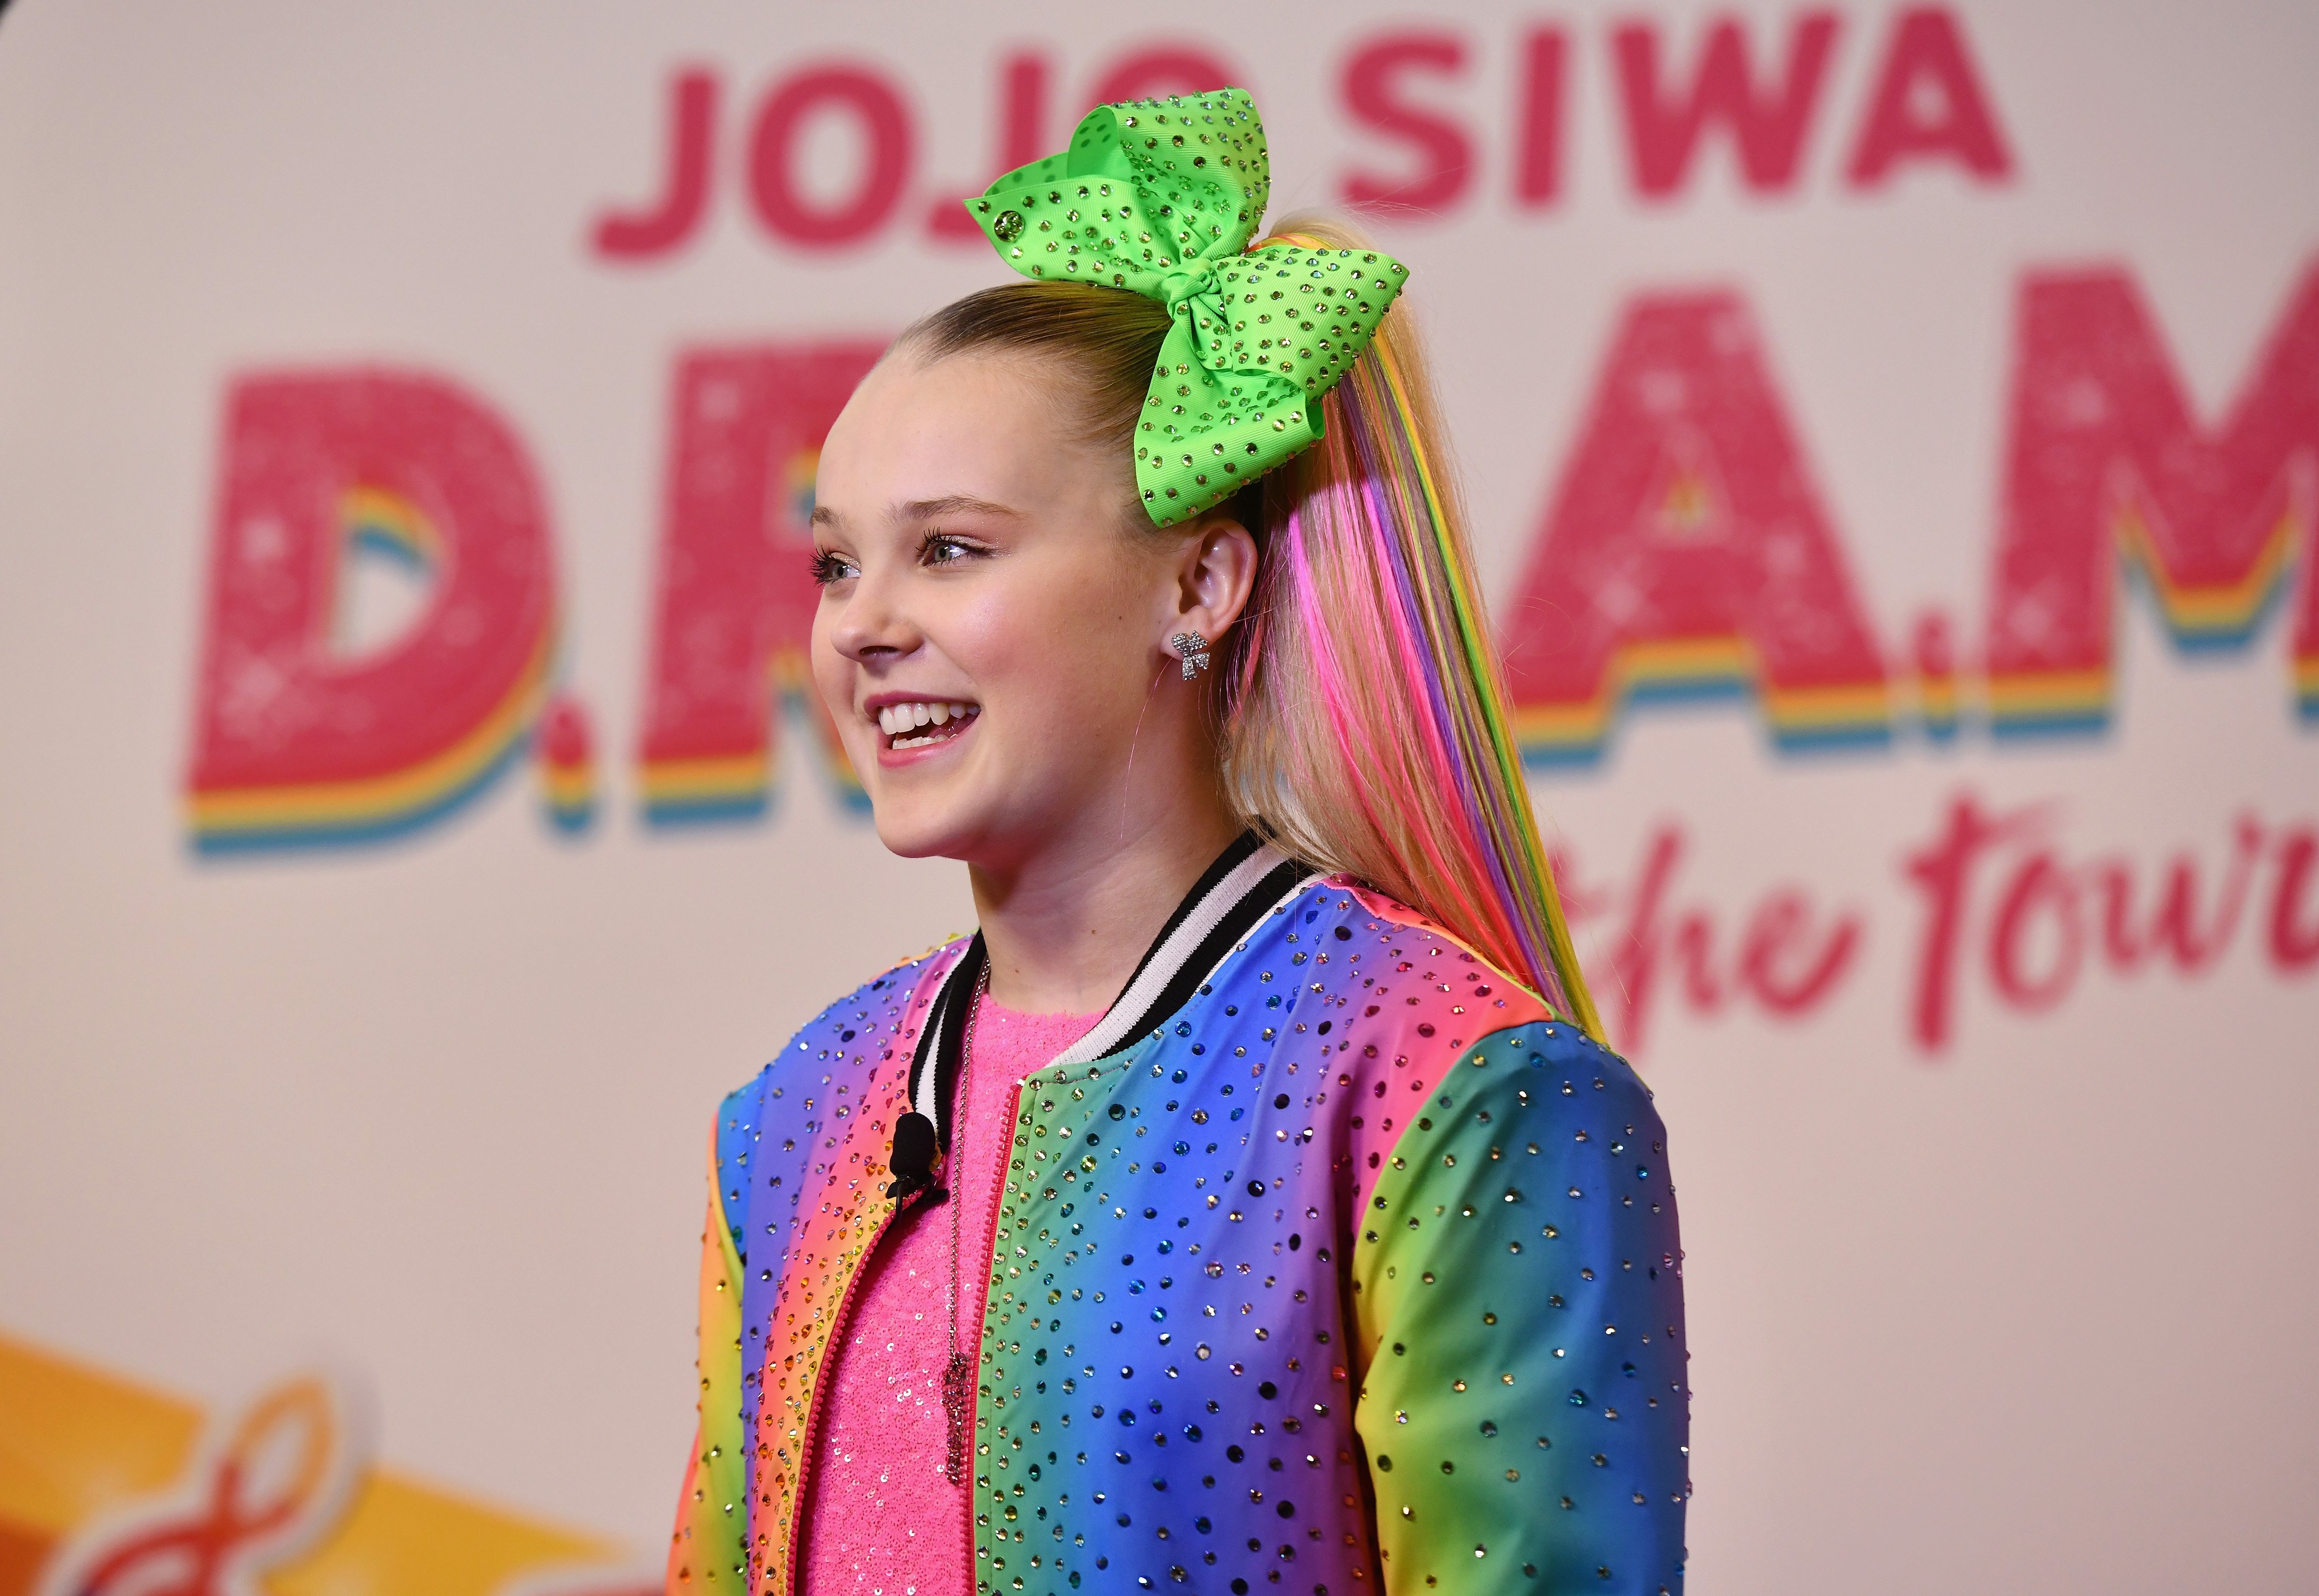 JoJo Siwa announces her upcoming EP and D.R.E.A.M. Tour at Sugar Factory on November 7, 2018 in New York | Photo: Getty Images